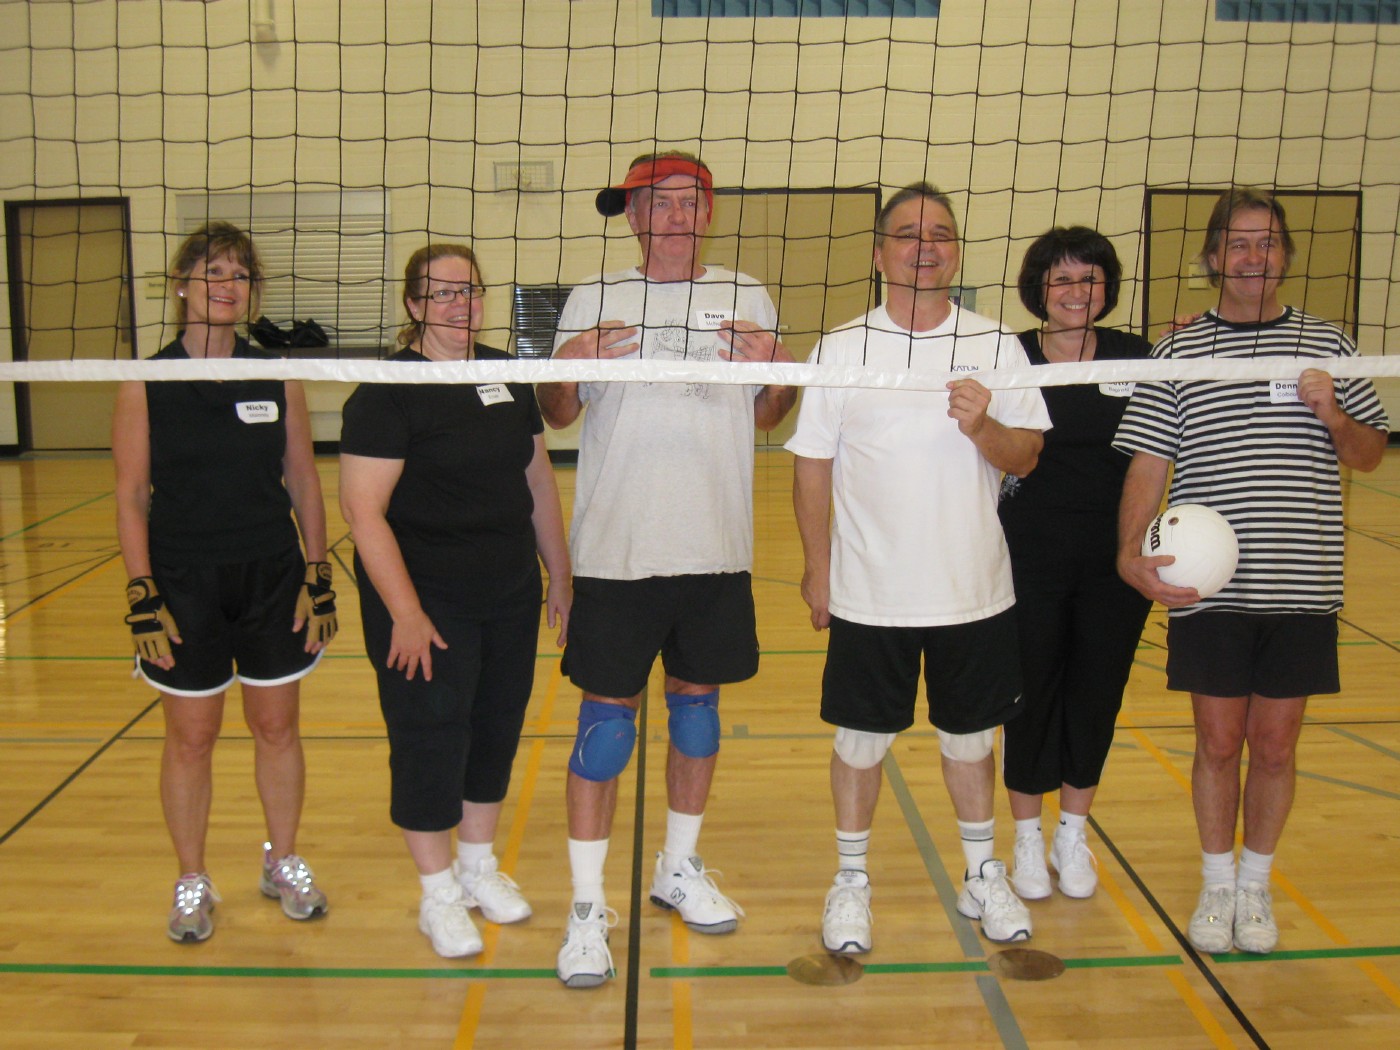 [Flower City Senior Volleyball Tournament, The Inmates]